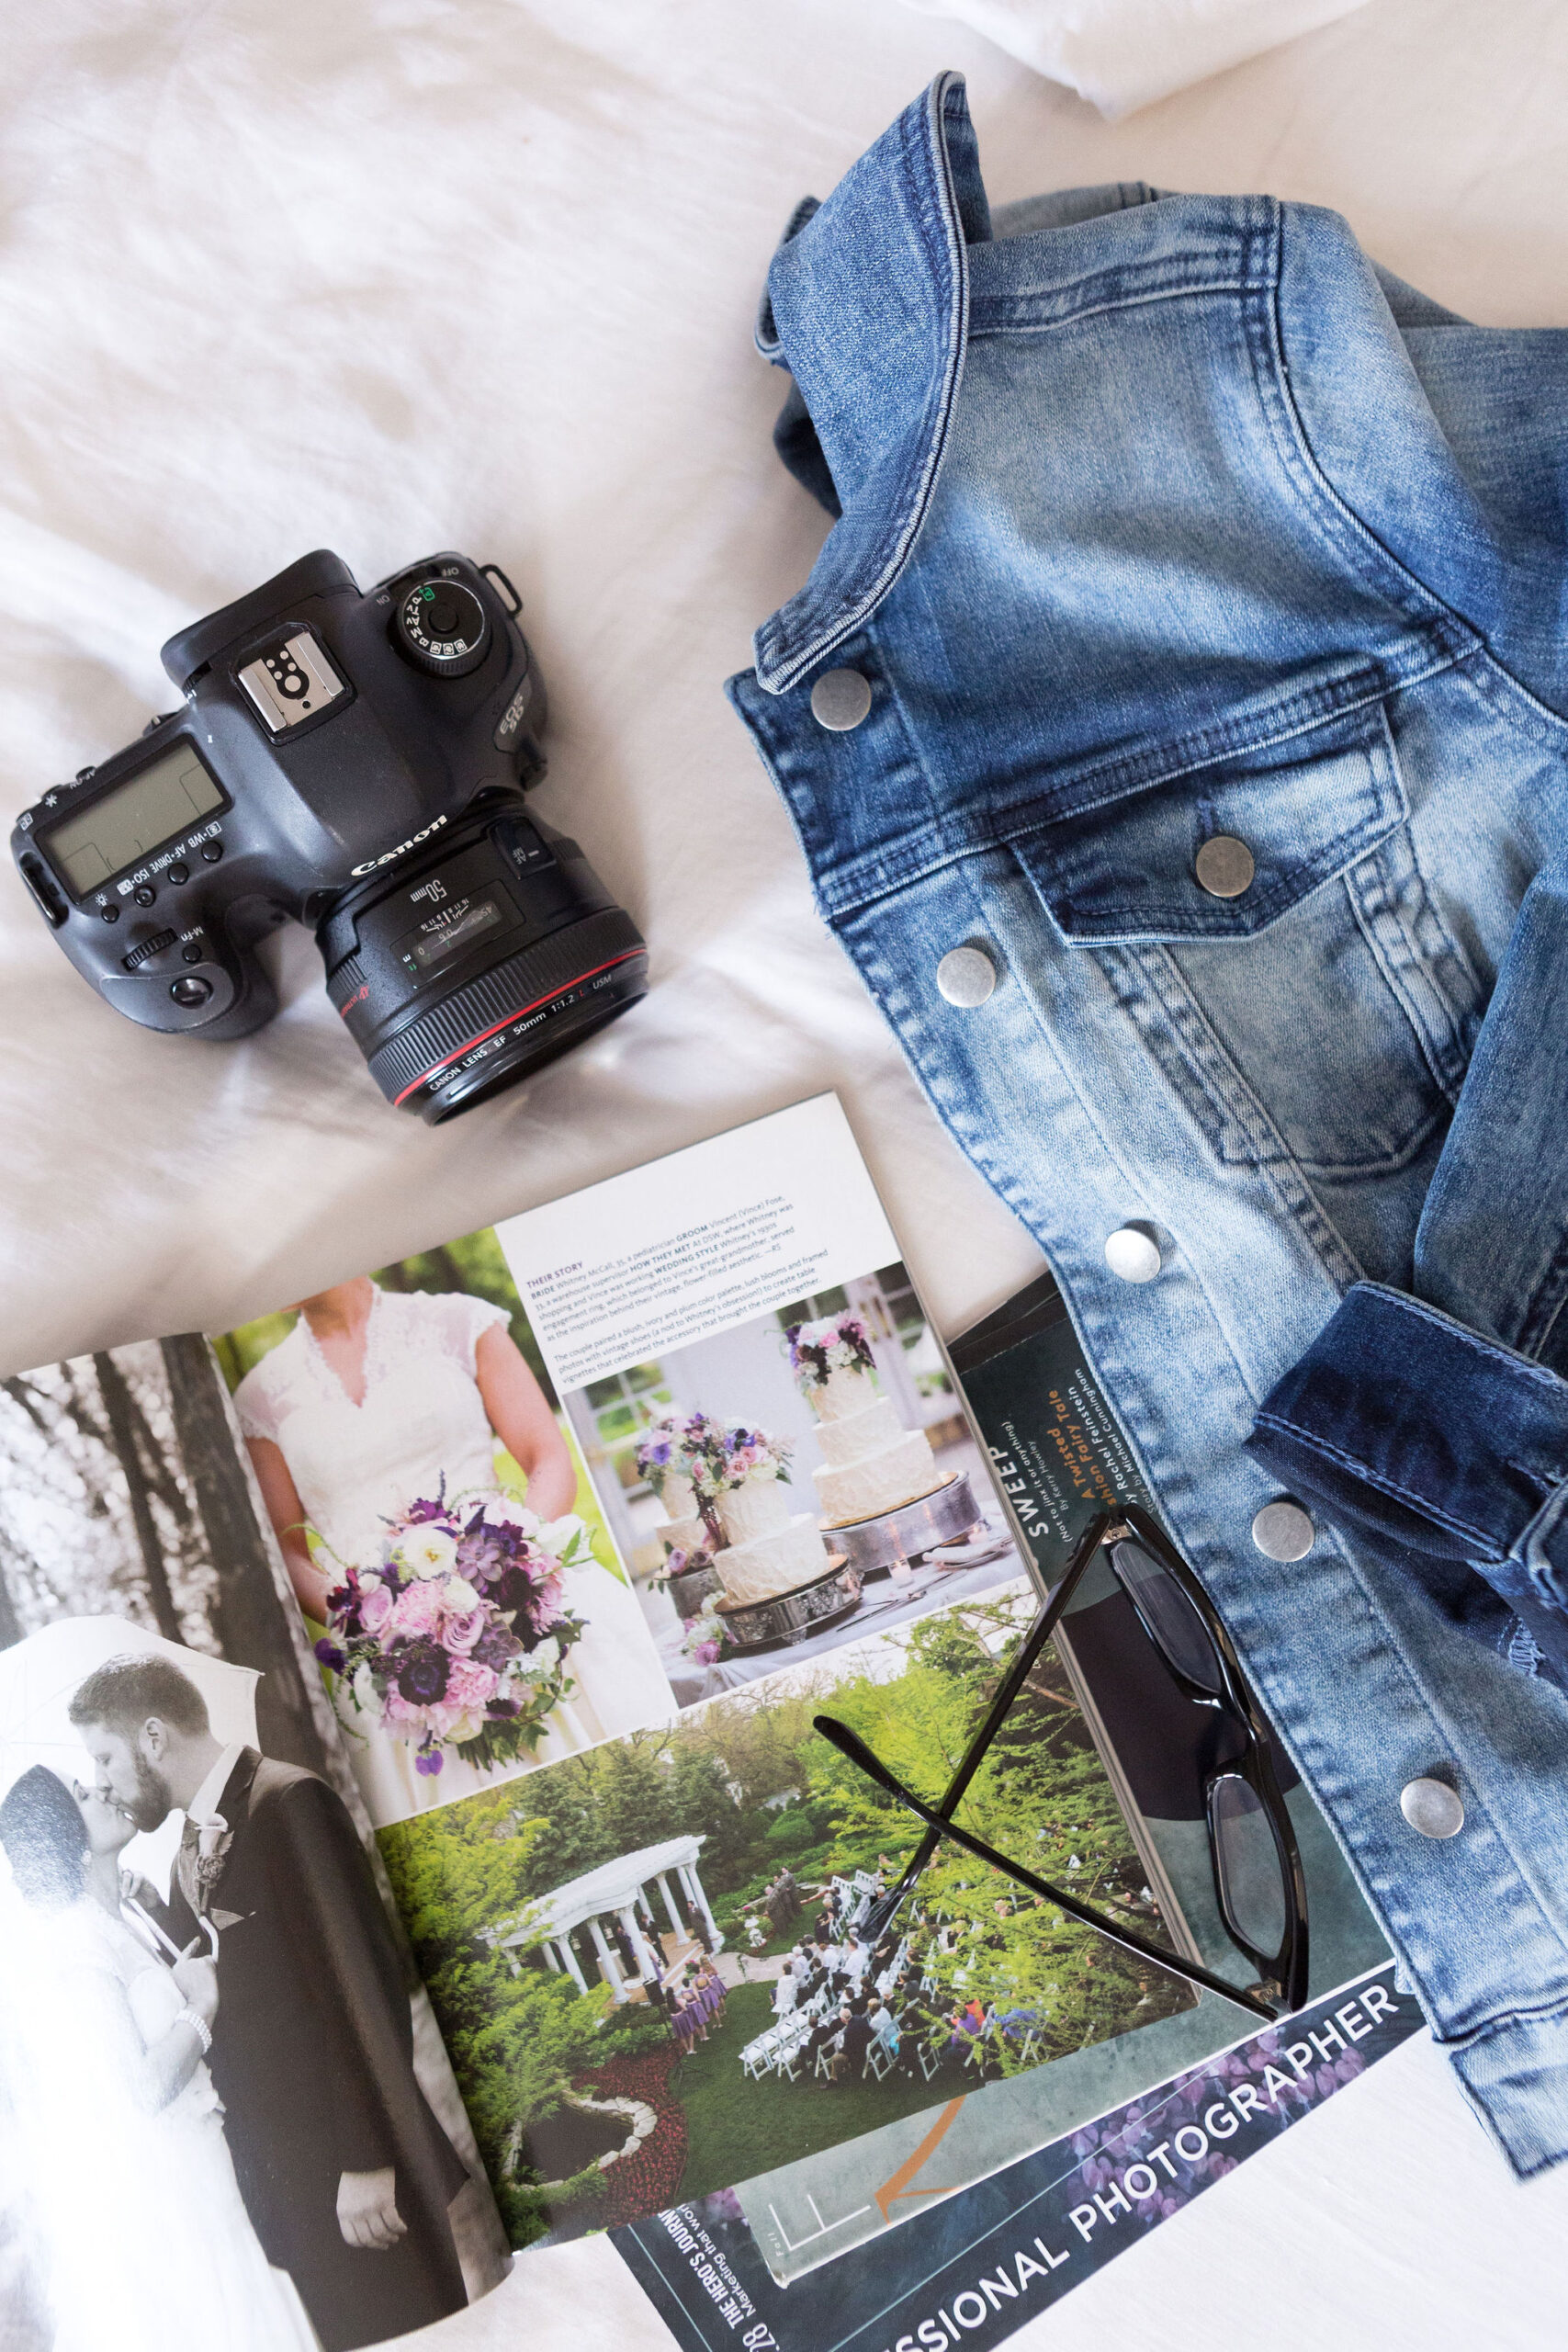 Professional camera, wedding magazine and jean jacket laying on a bed.